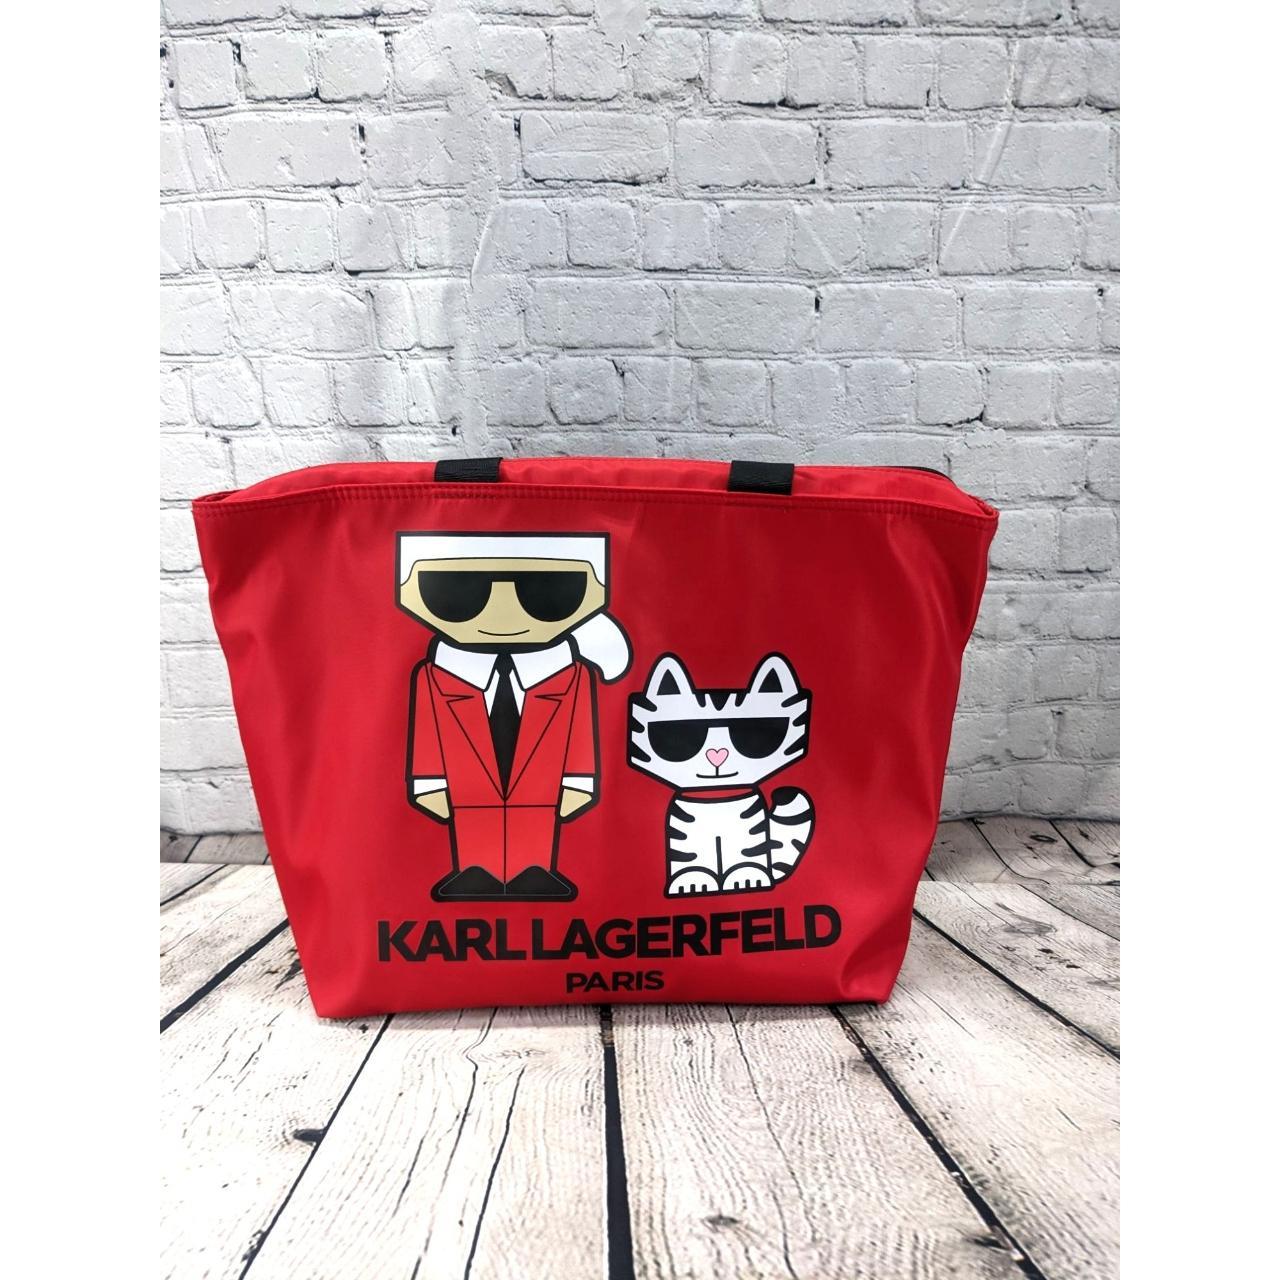 New Karl Lagerfeld Paris Amour Tote Bag Red 14.25